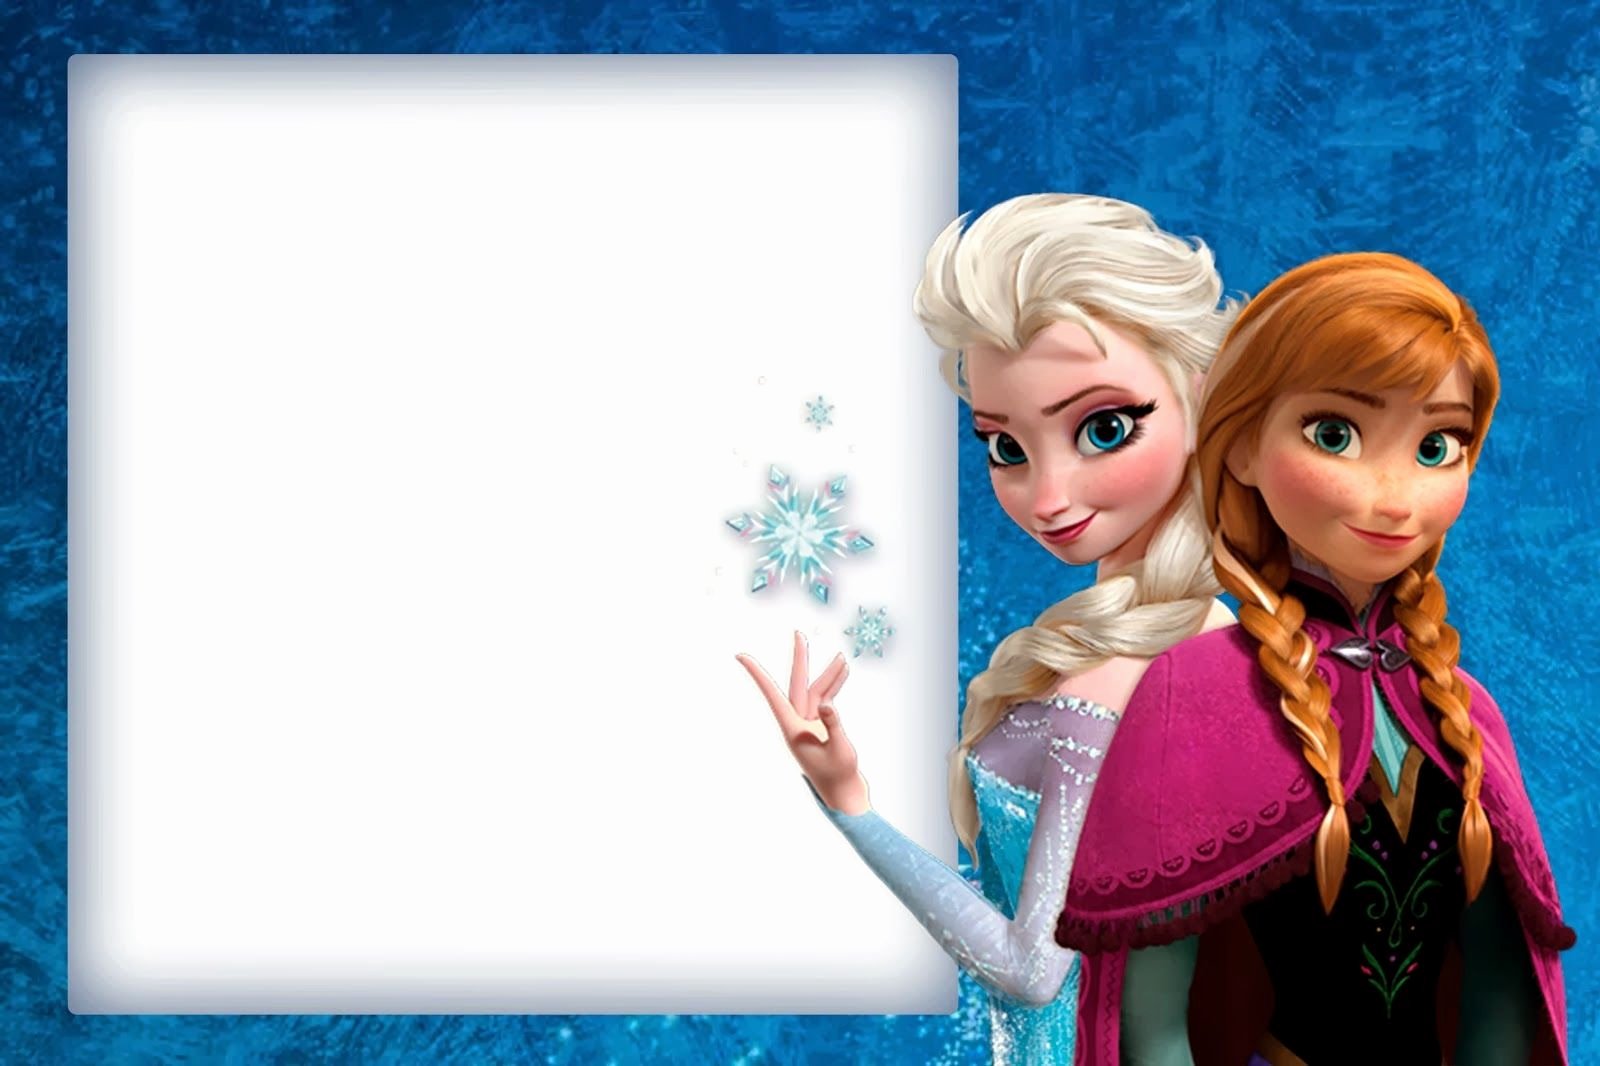 Free Frozen Invitation Templates Best Of Frozen Cute Free Printable Invitations A Few Nice Ones